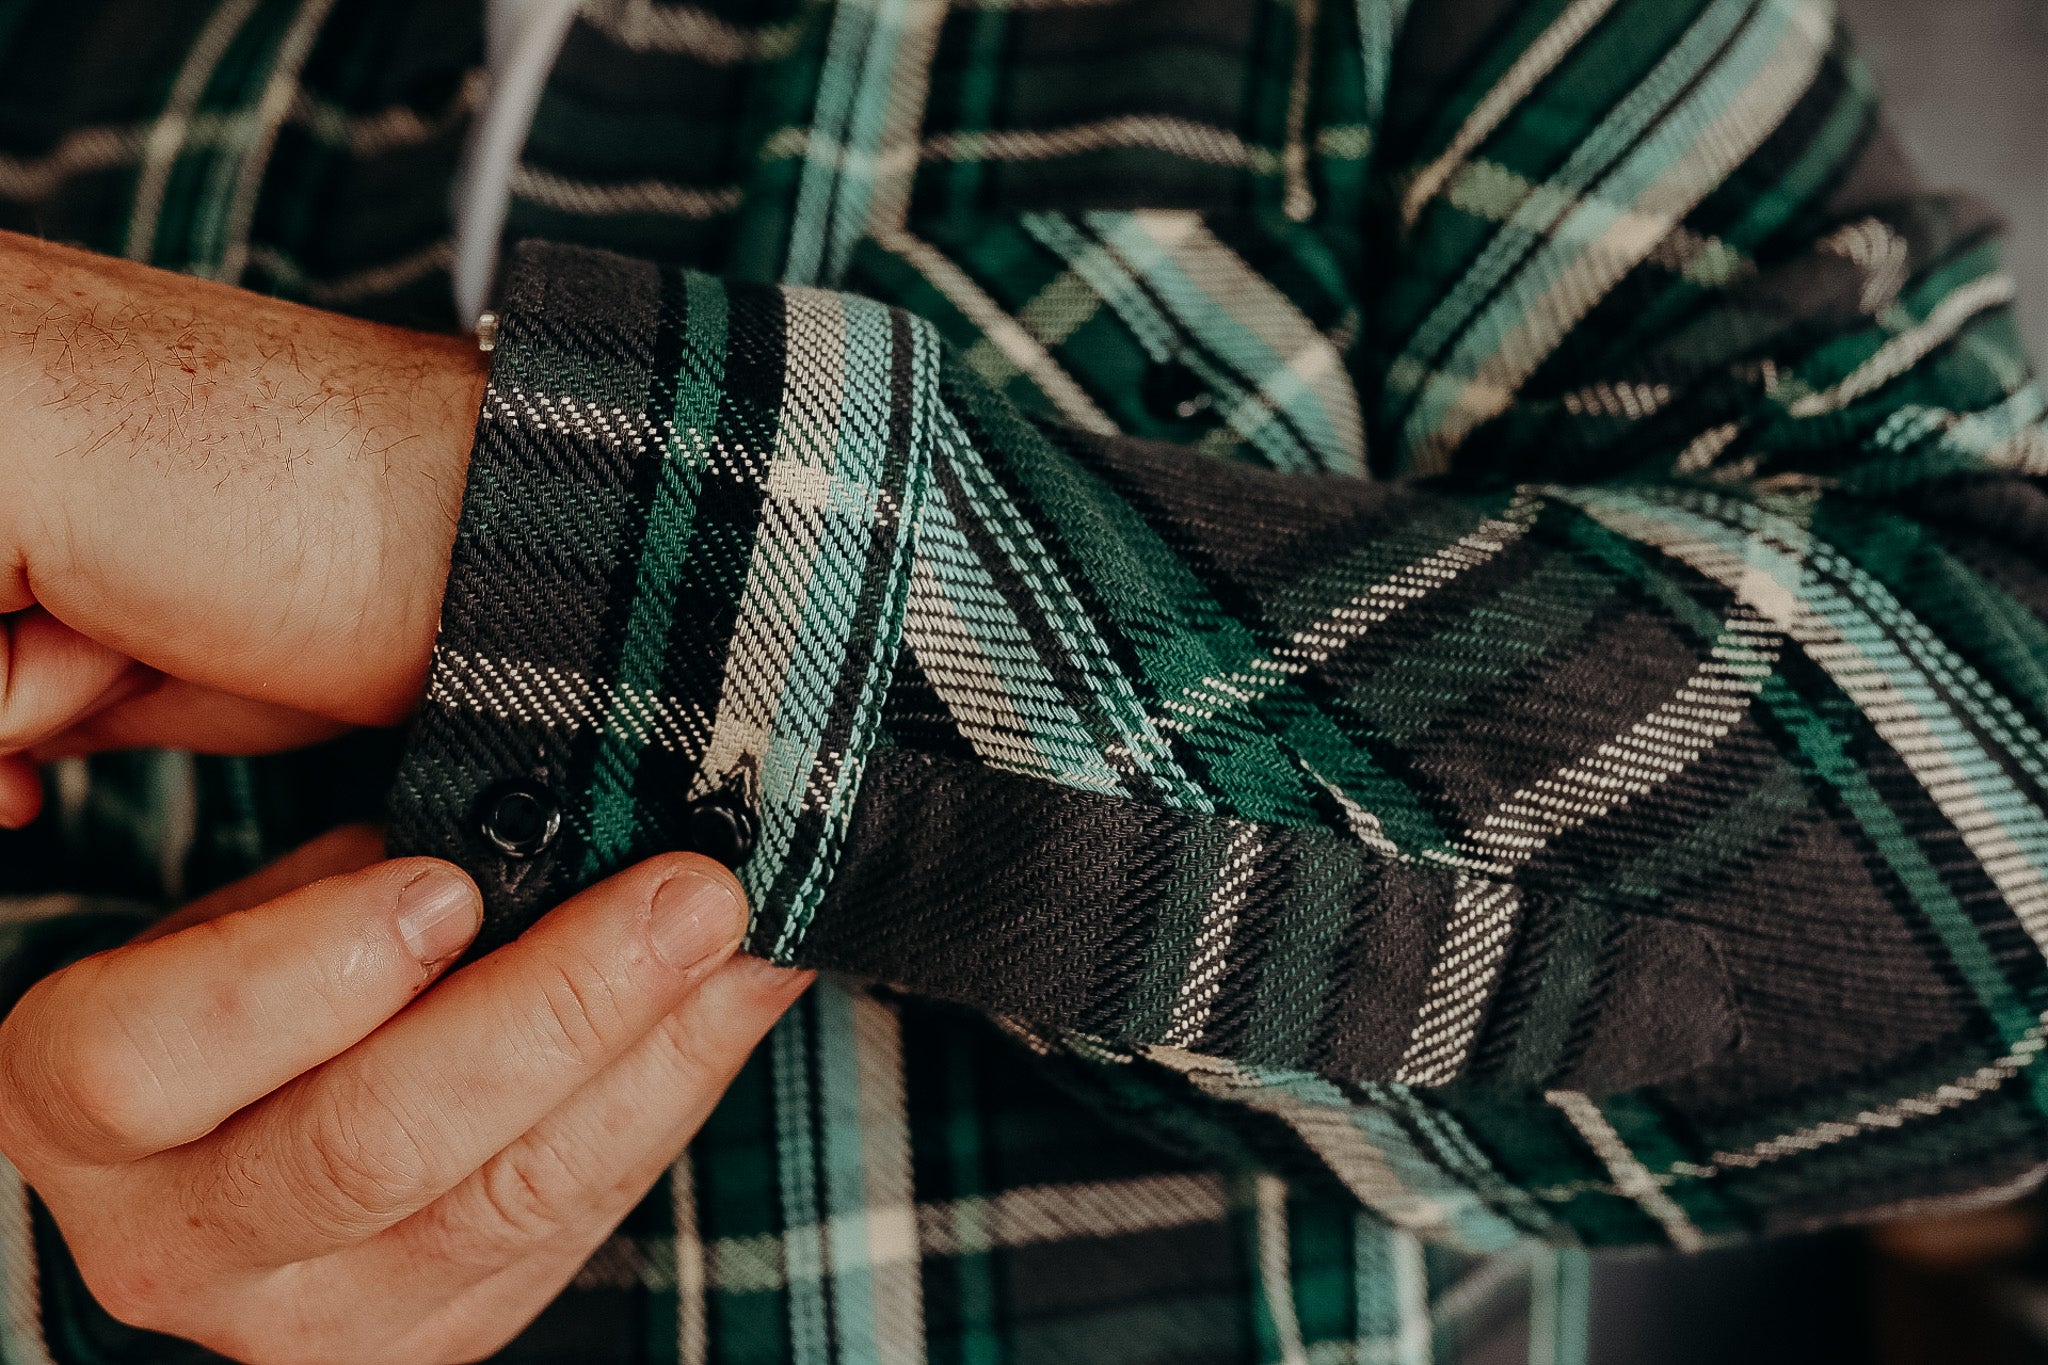 Bryson Shirt- Unbrushed Check, Black / Green / White / Turquoise